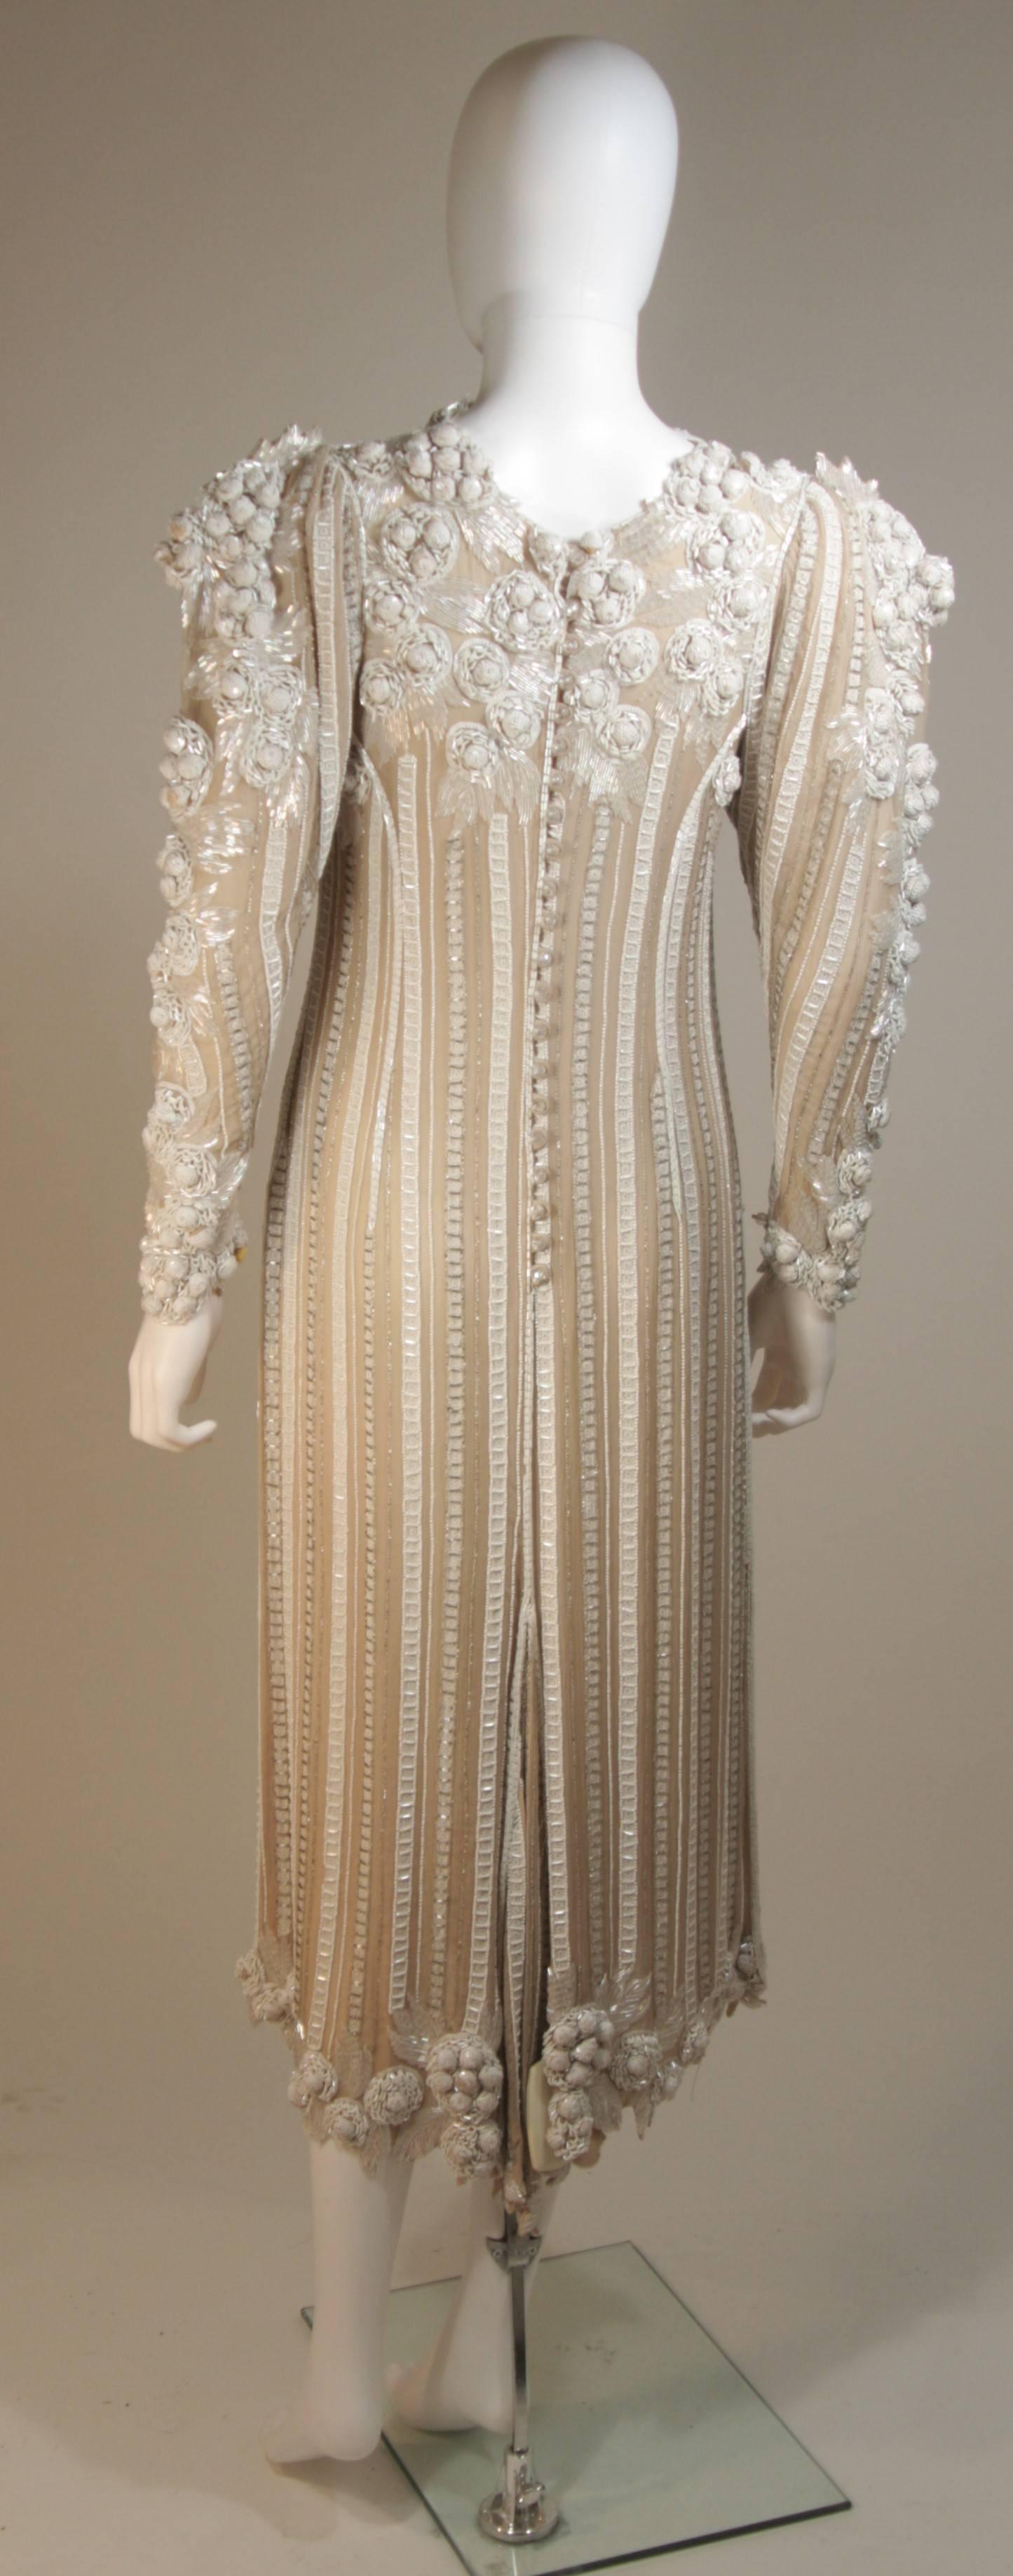 APROPOS 1980's Ivory Beaded Gown with Shoulder Accents Size 6-8 For Sale 2